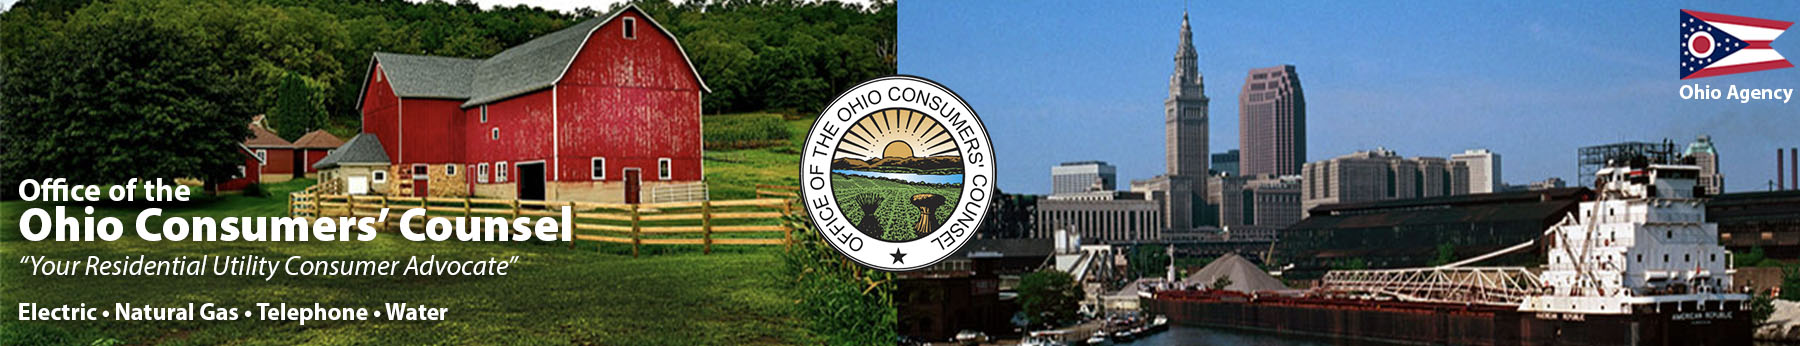 Office of the Ohio Consumers' Counsel Logo - Your Residential Utility Advocate- Electric - Natural Gas - Telephone - Water